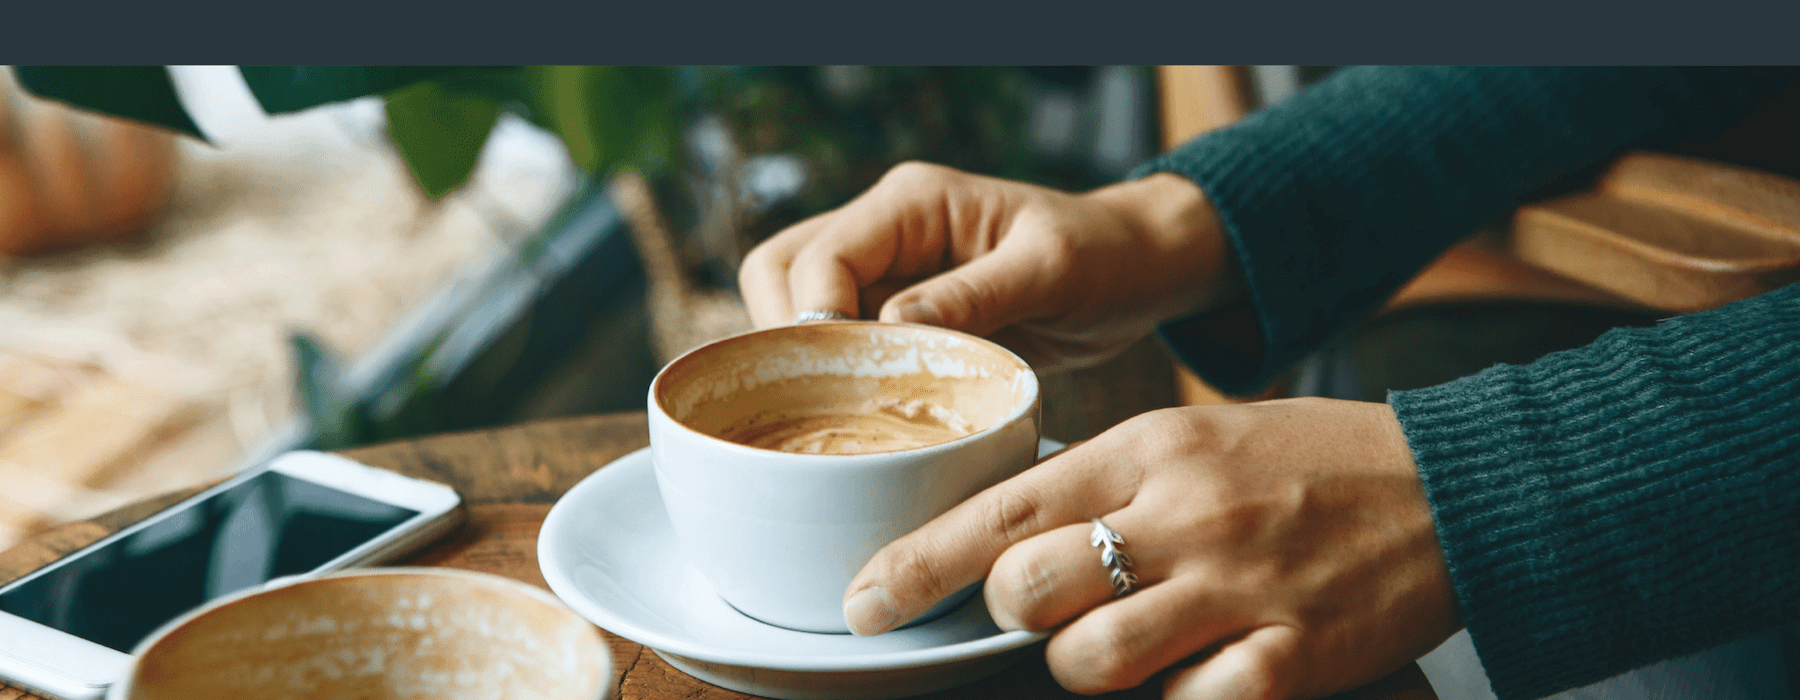 hands holding a coffee cup